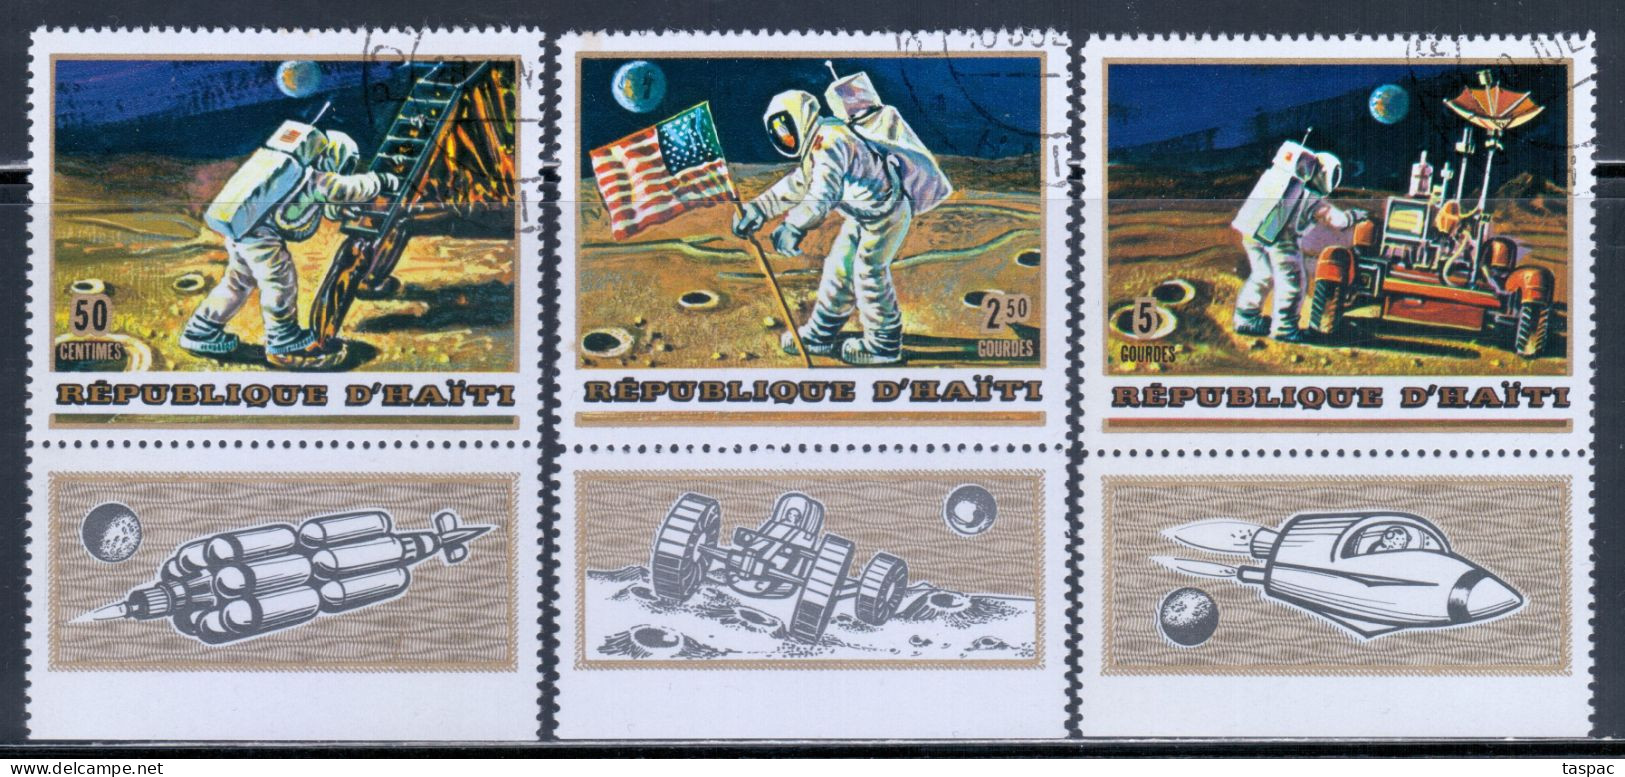 Haiti 1973 Mi# Not Listed - Unofficial Set Of 3 Used - With Ill. Margins - Apollo / Space - Amérique Du Nord